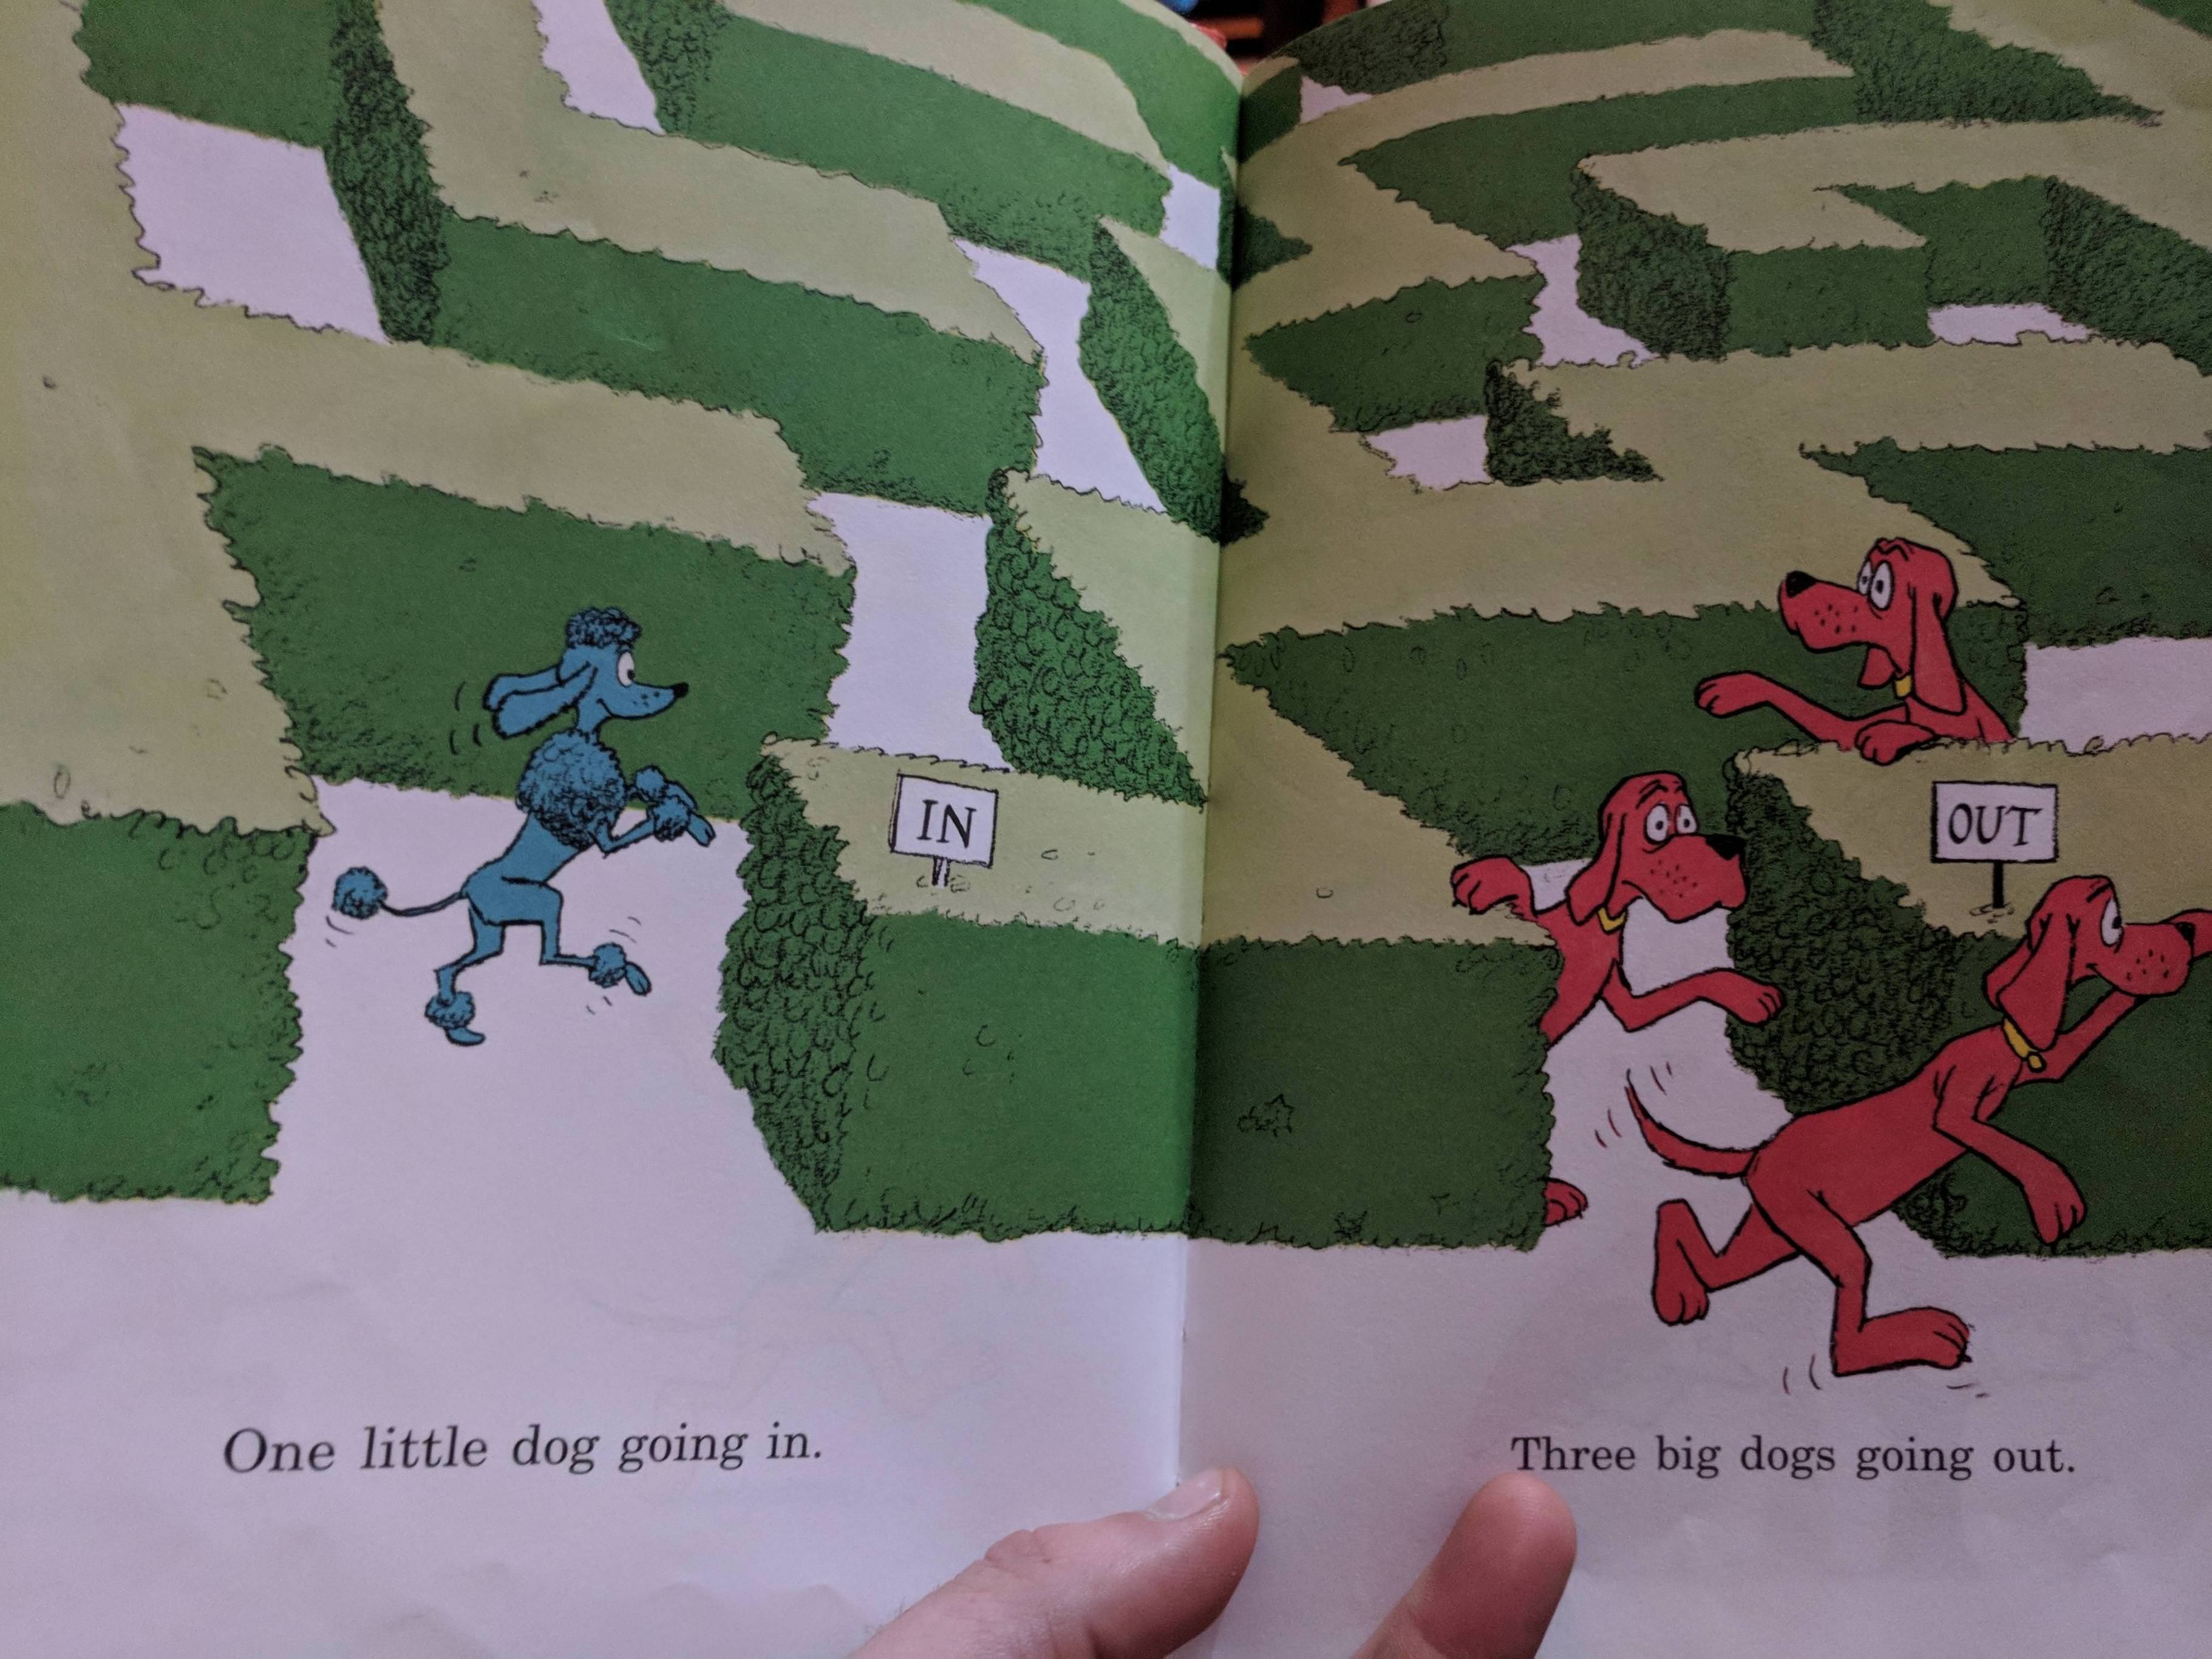 I don't know what went on in the hedge maze, but the dogs leaving look like they've seen some shit.